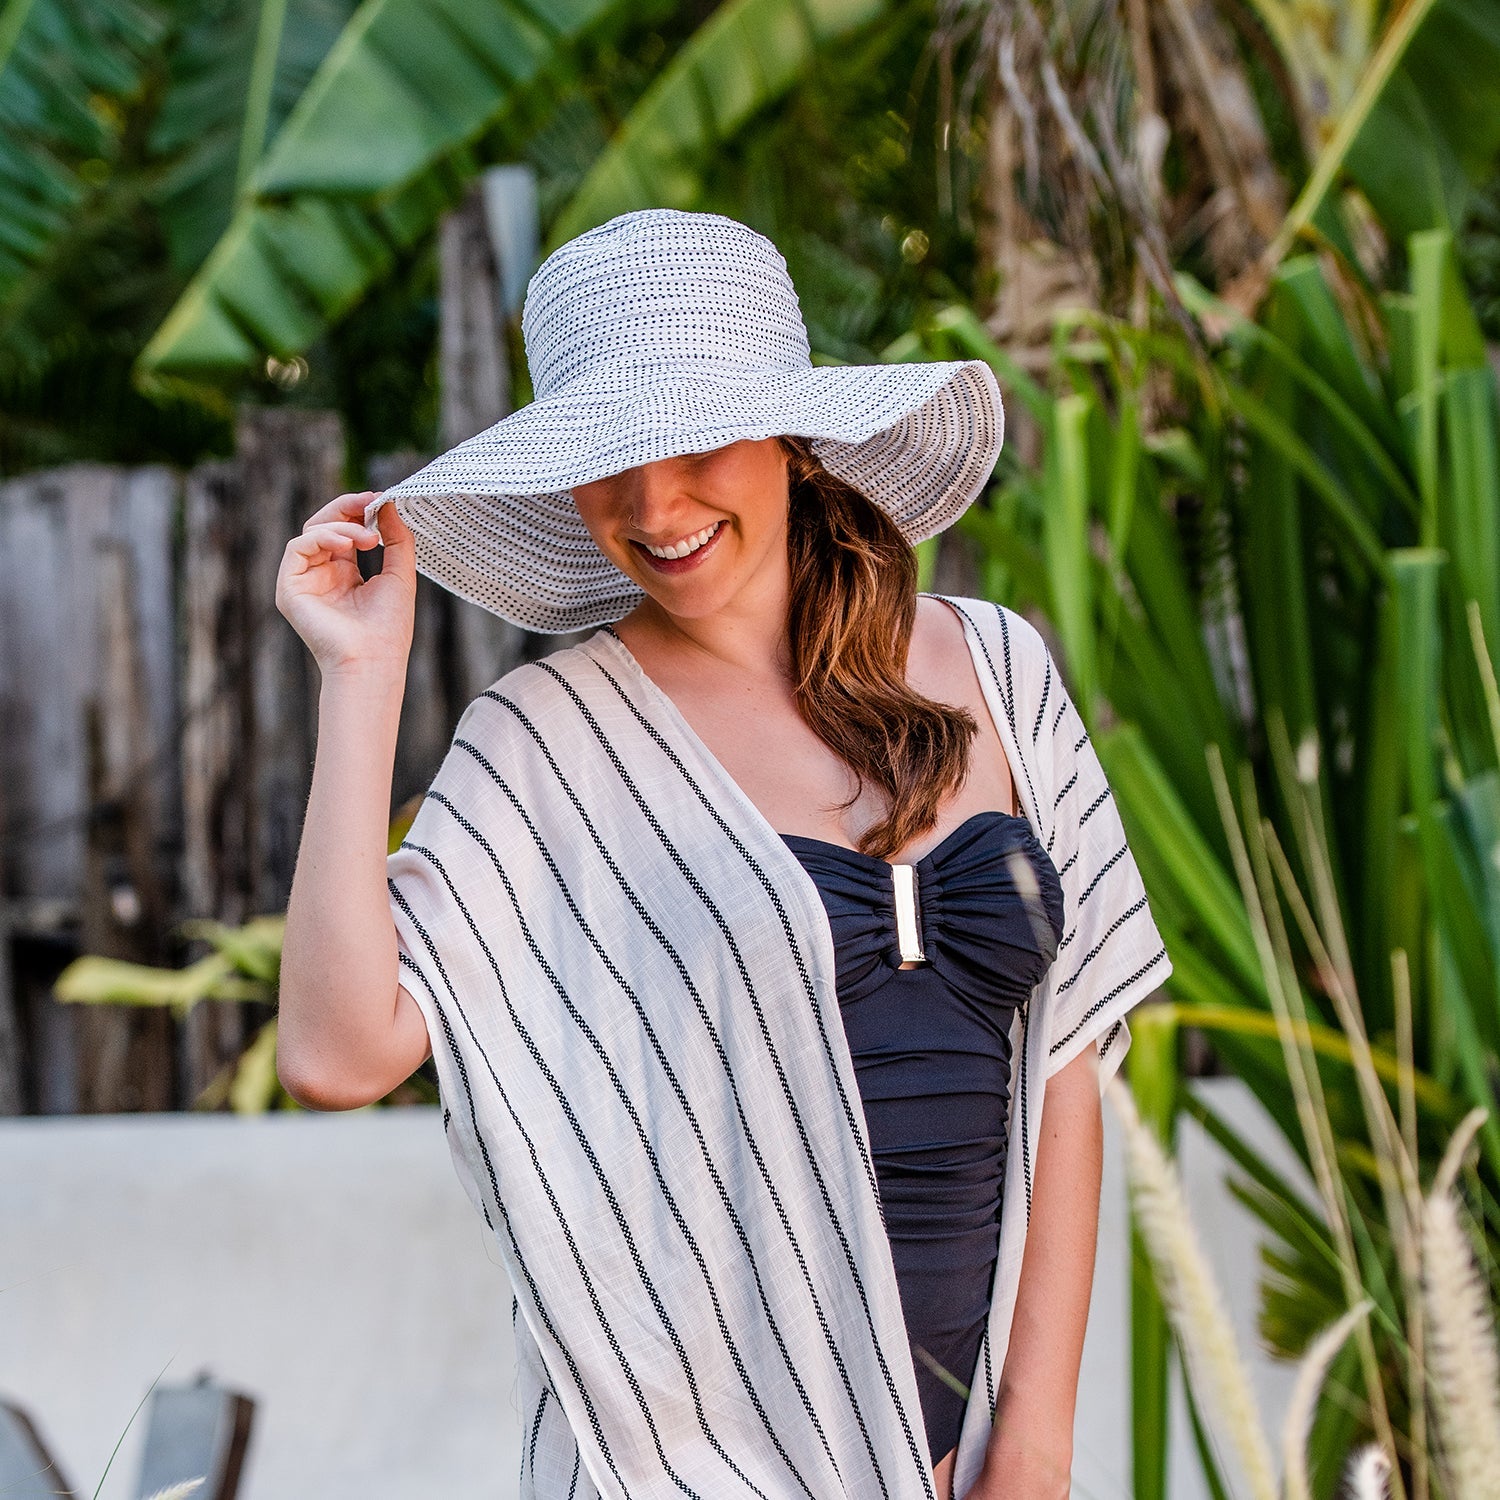 Charming polka dots cover the Scrunchie hat. The wire-edged brim hat can be adjusted for every mood – straighten it out for a stylish silhouette or wear it wavy for a flirty look. The wide brim allows for maximum sun protection.